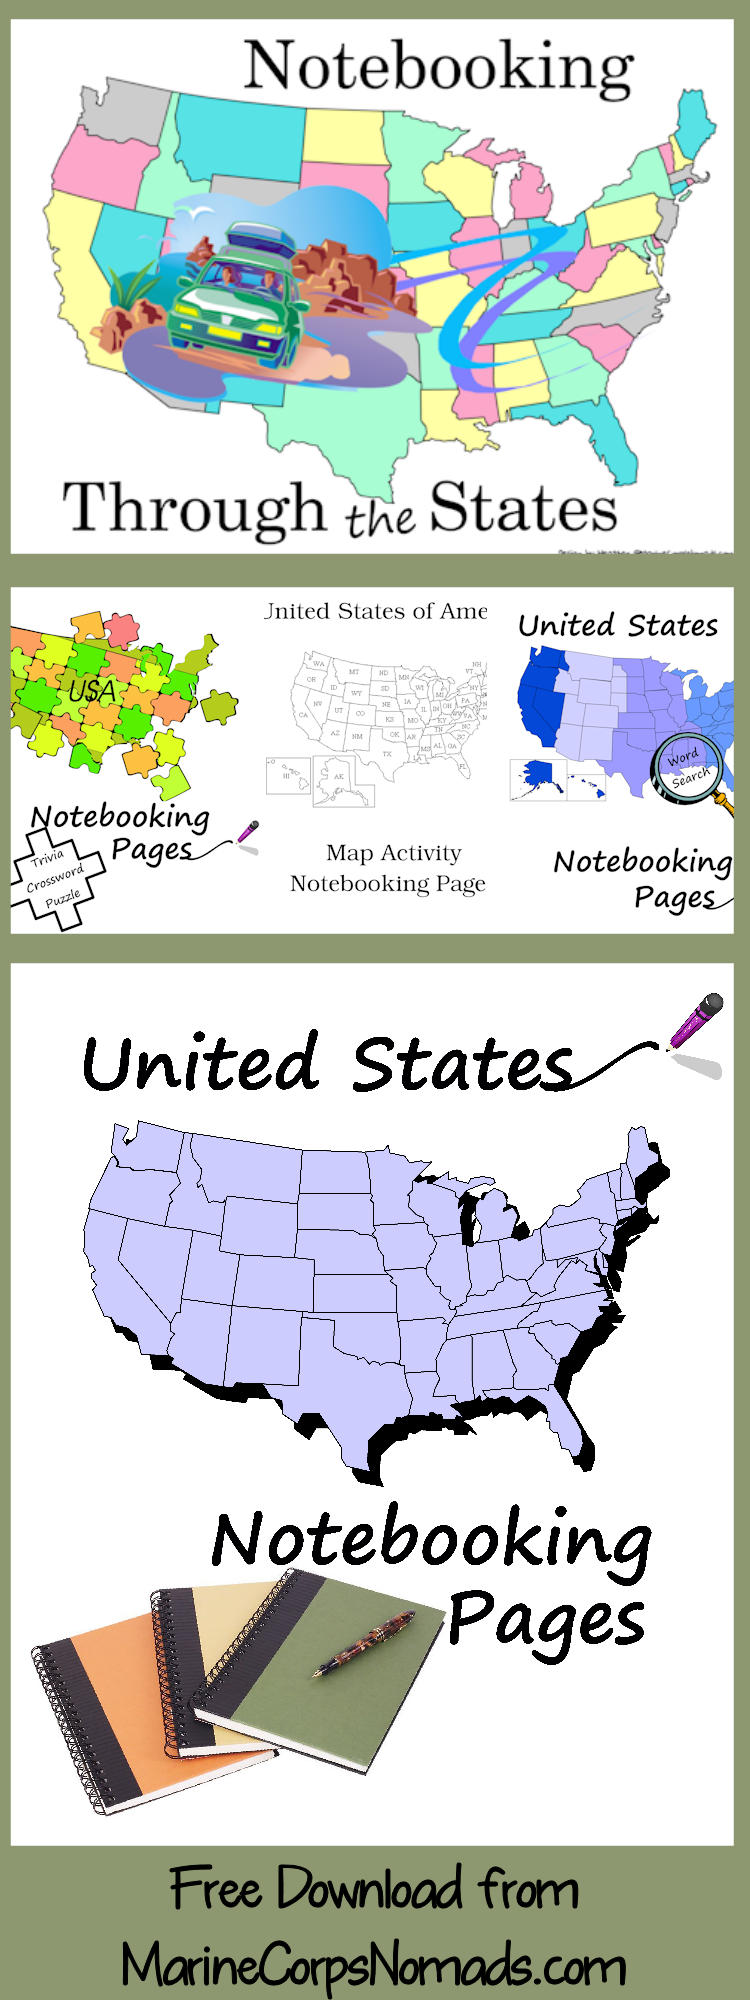 Free state notebooking pages and state activities for homeschool and classroom use.